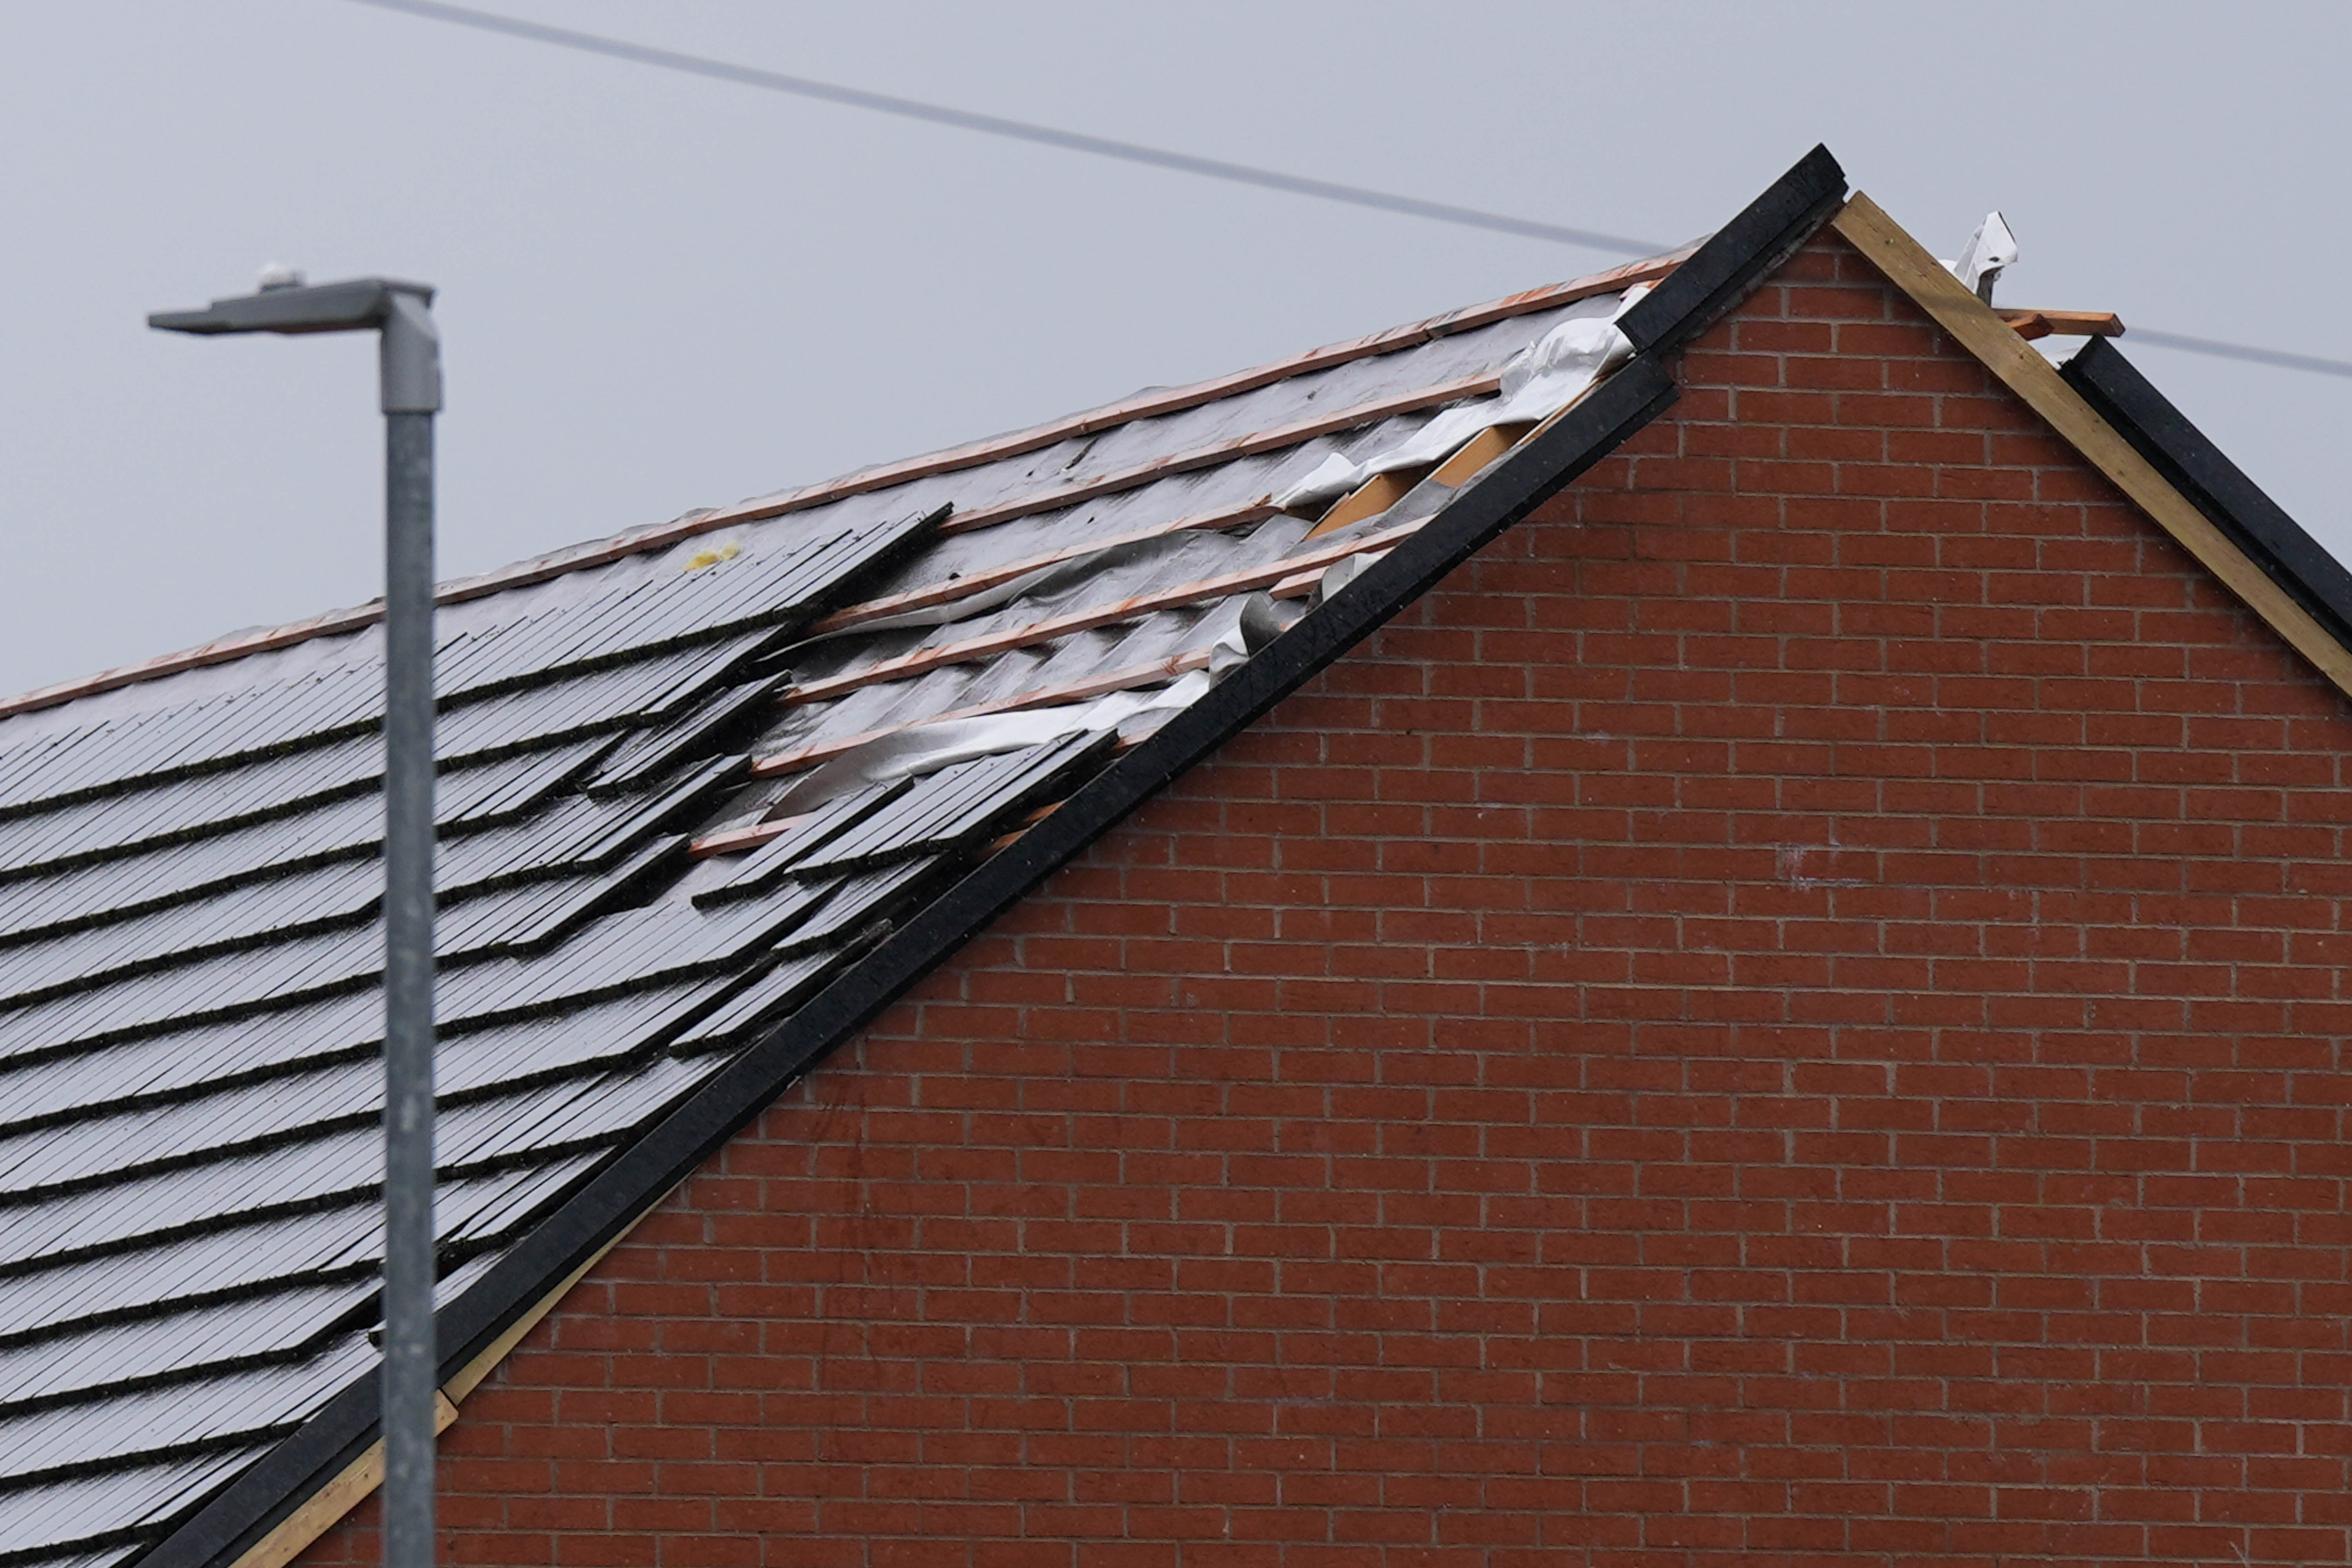 Missing tiles from a roof on St Gile’s Road in Knutton, Staffordshire, where high winds caused damage in the early hours of the morning